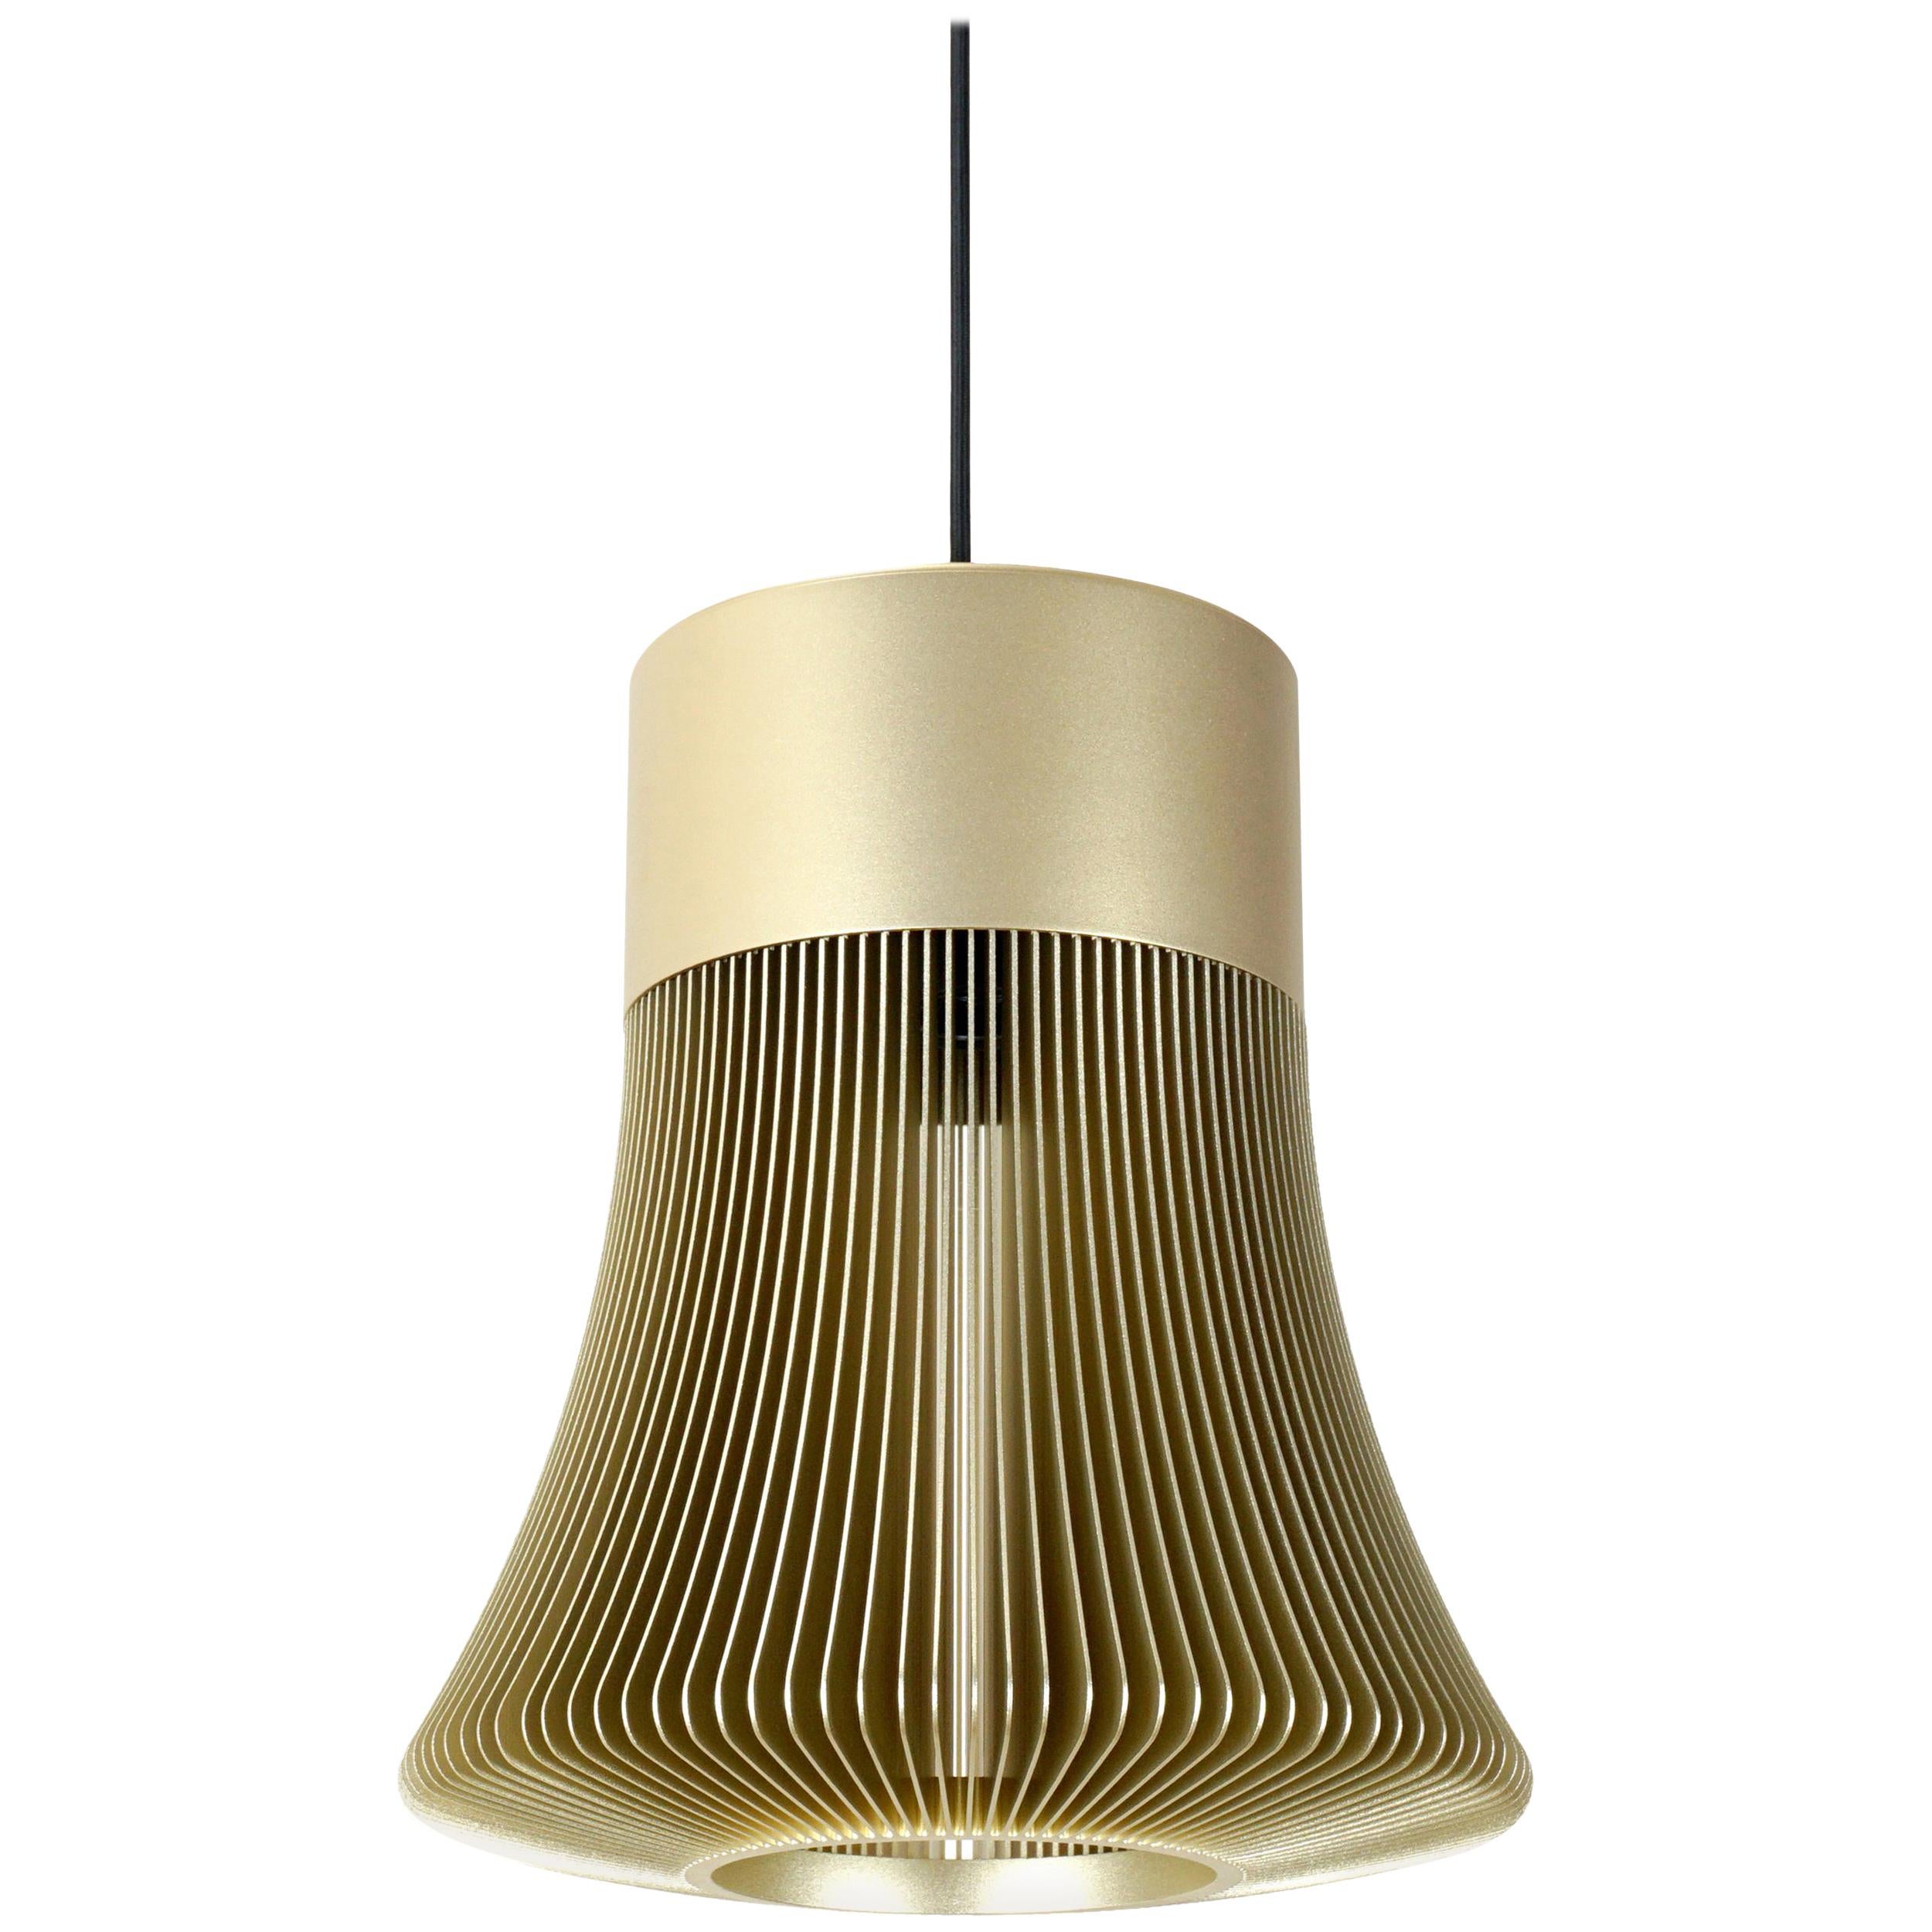 Le Sergent Pendant Lamp Anodized Aluminum in Gold Color by Michael Young